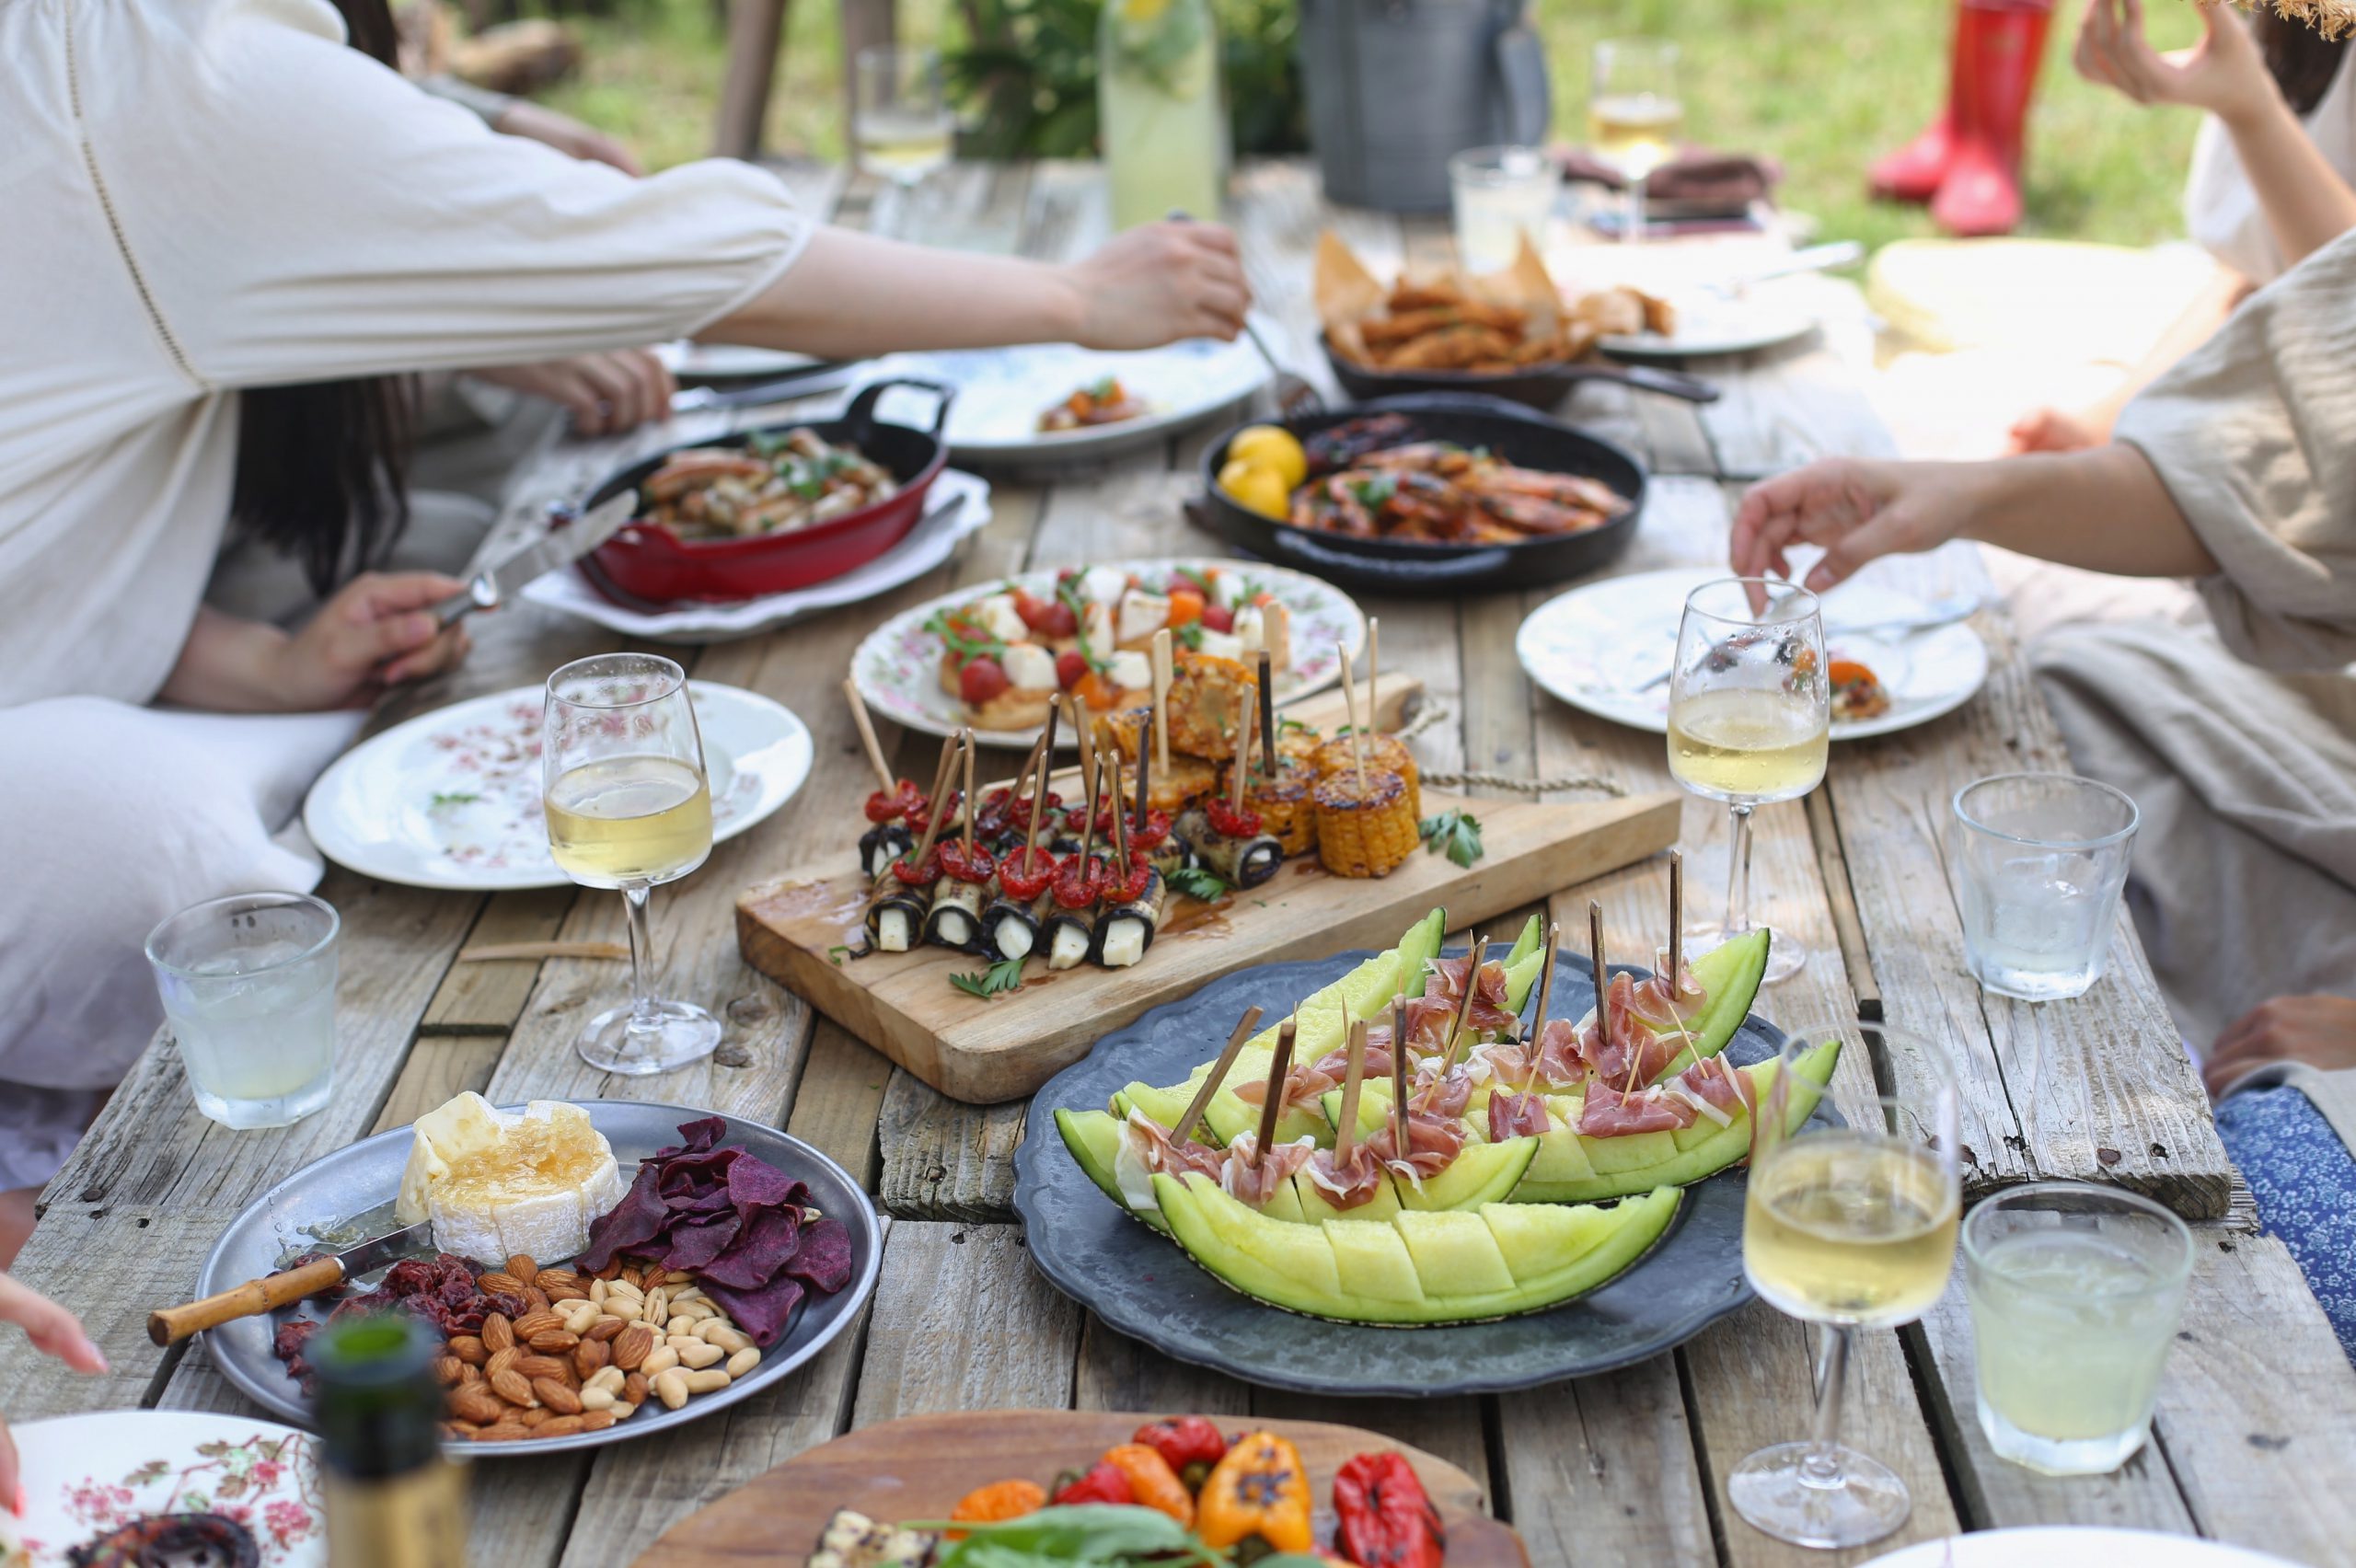 Variety of colorful foods on a wooden table with wine glasses and multiple hands reaching across